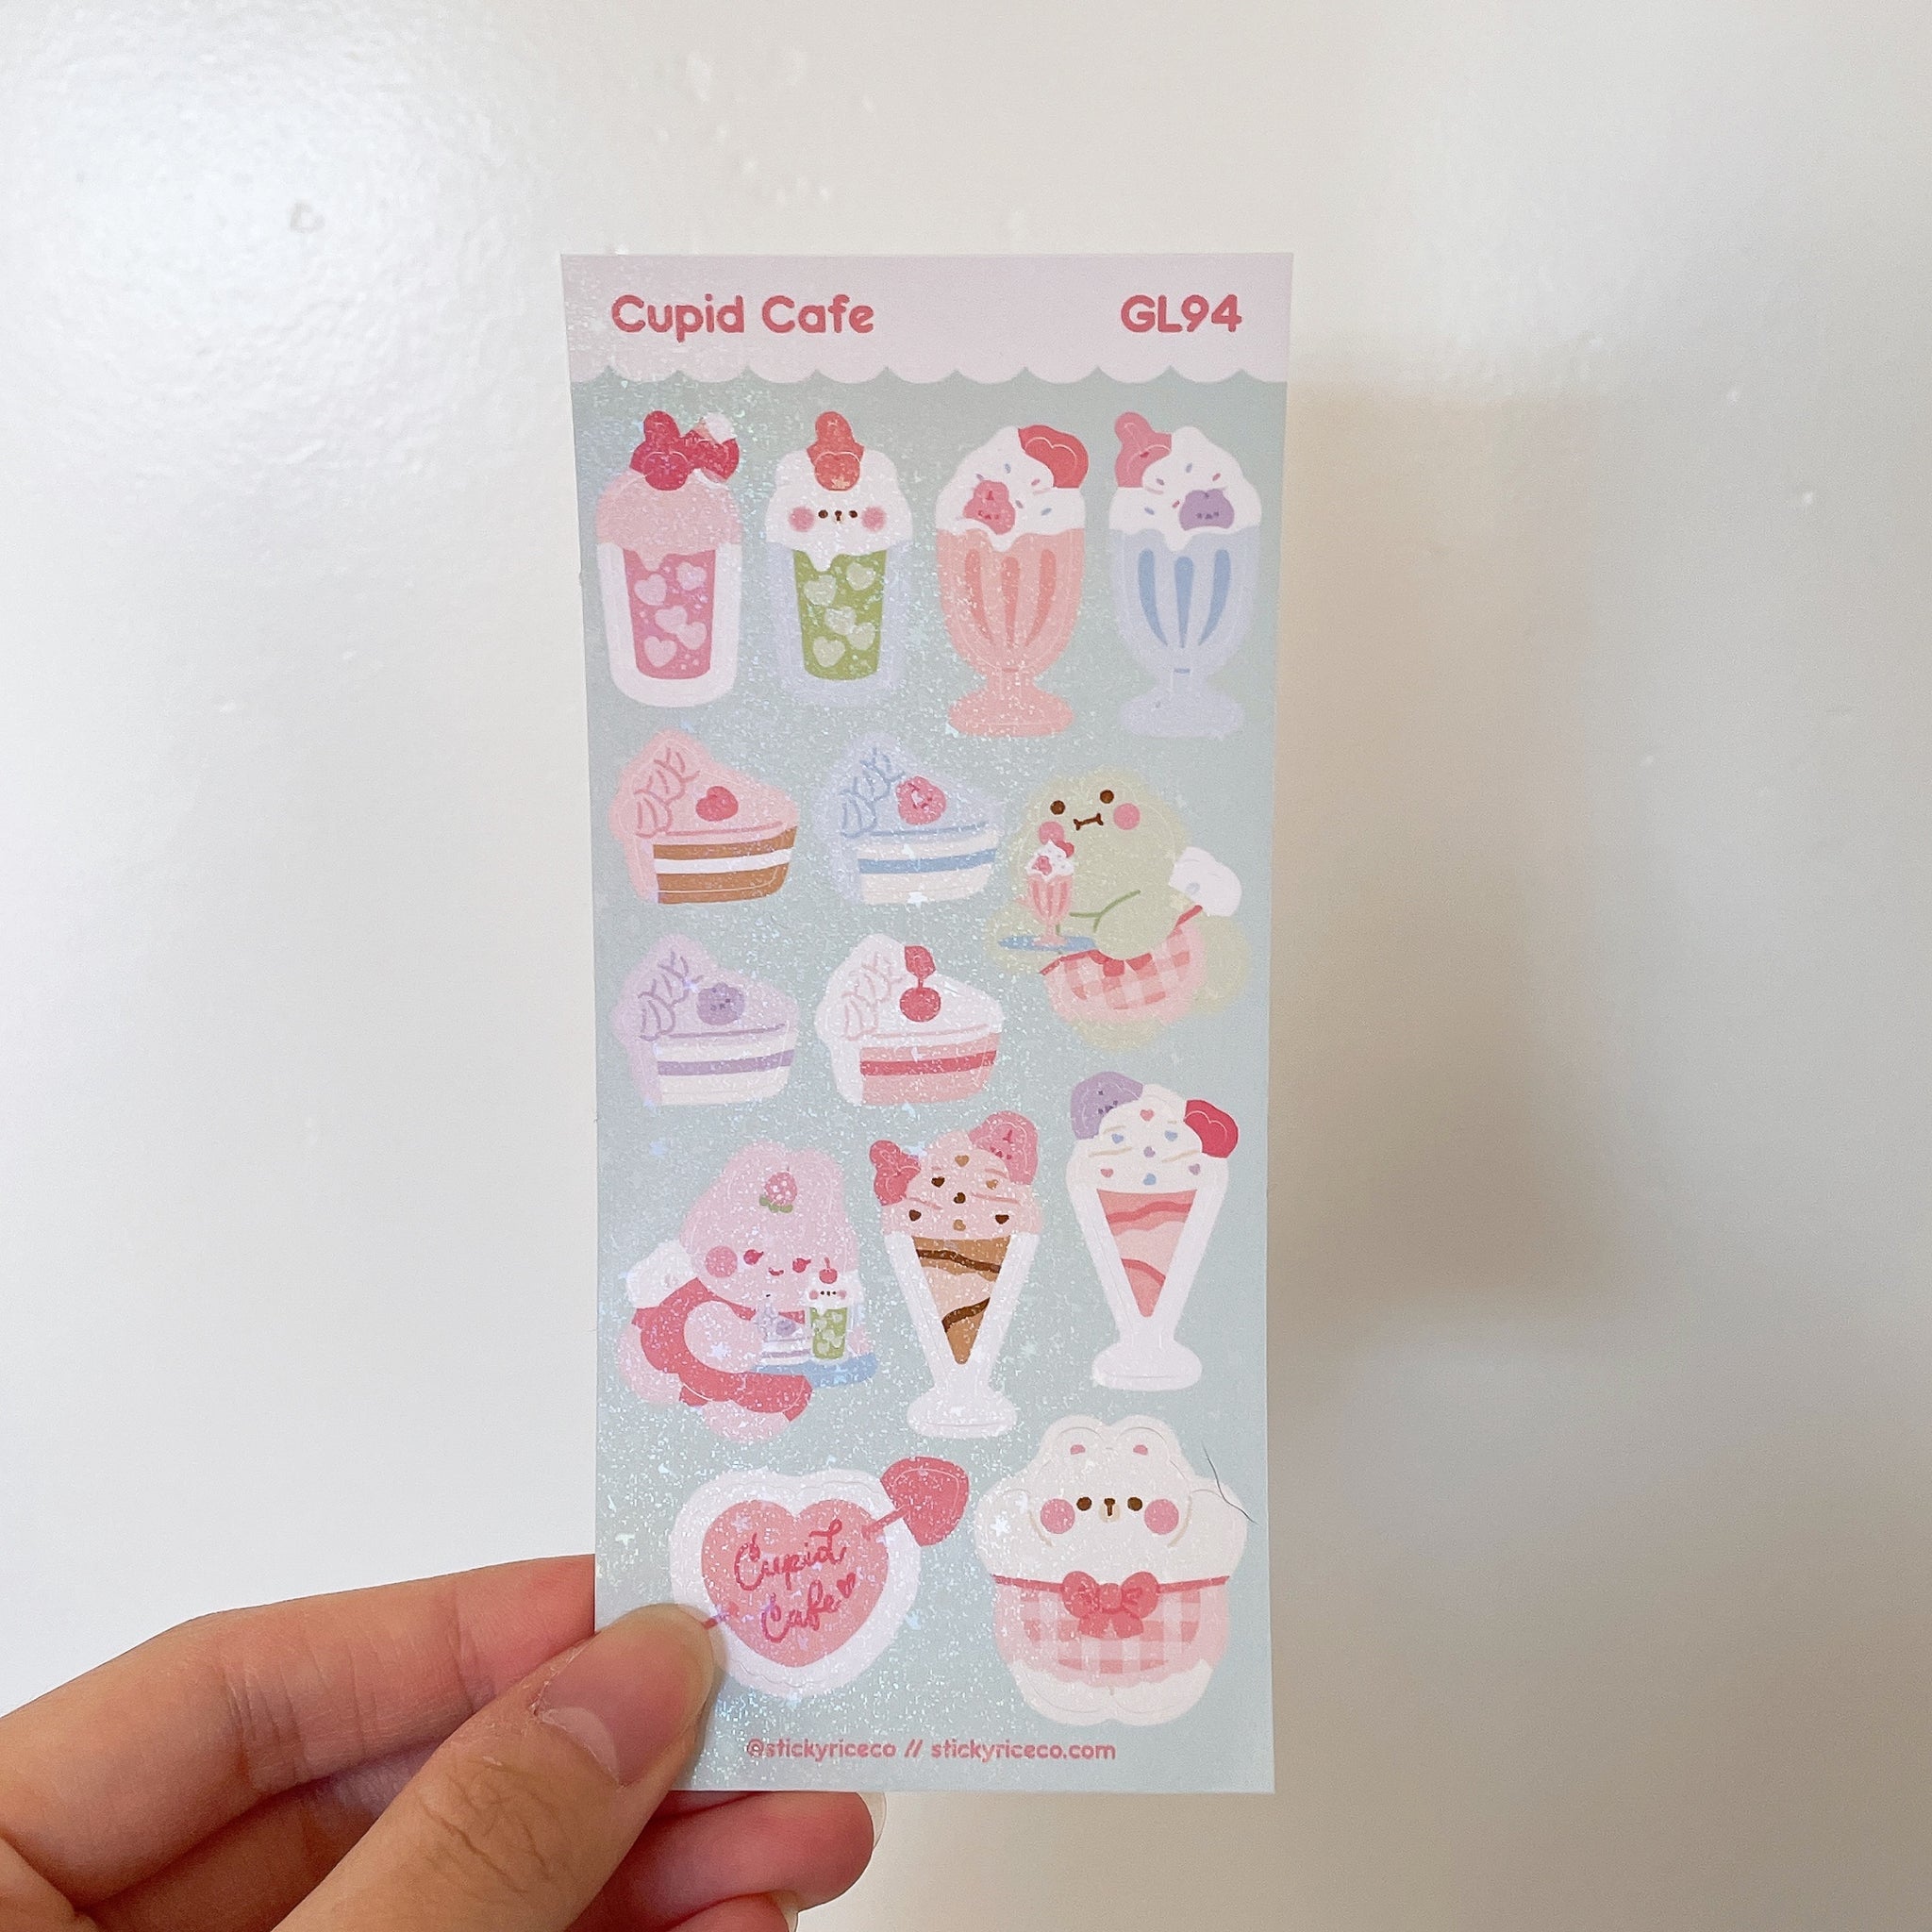 Cupid Cafe StickyRiceCo Friends Holographic Glitter Vinyl Deco Stickers